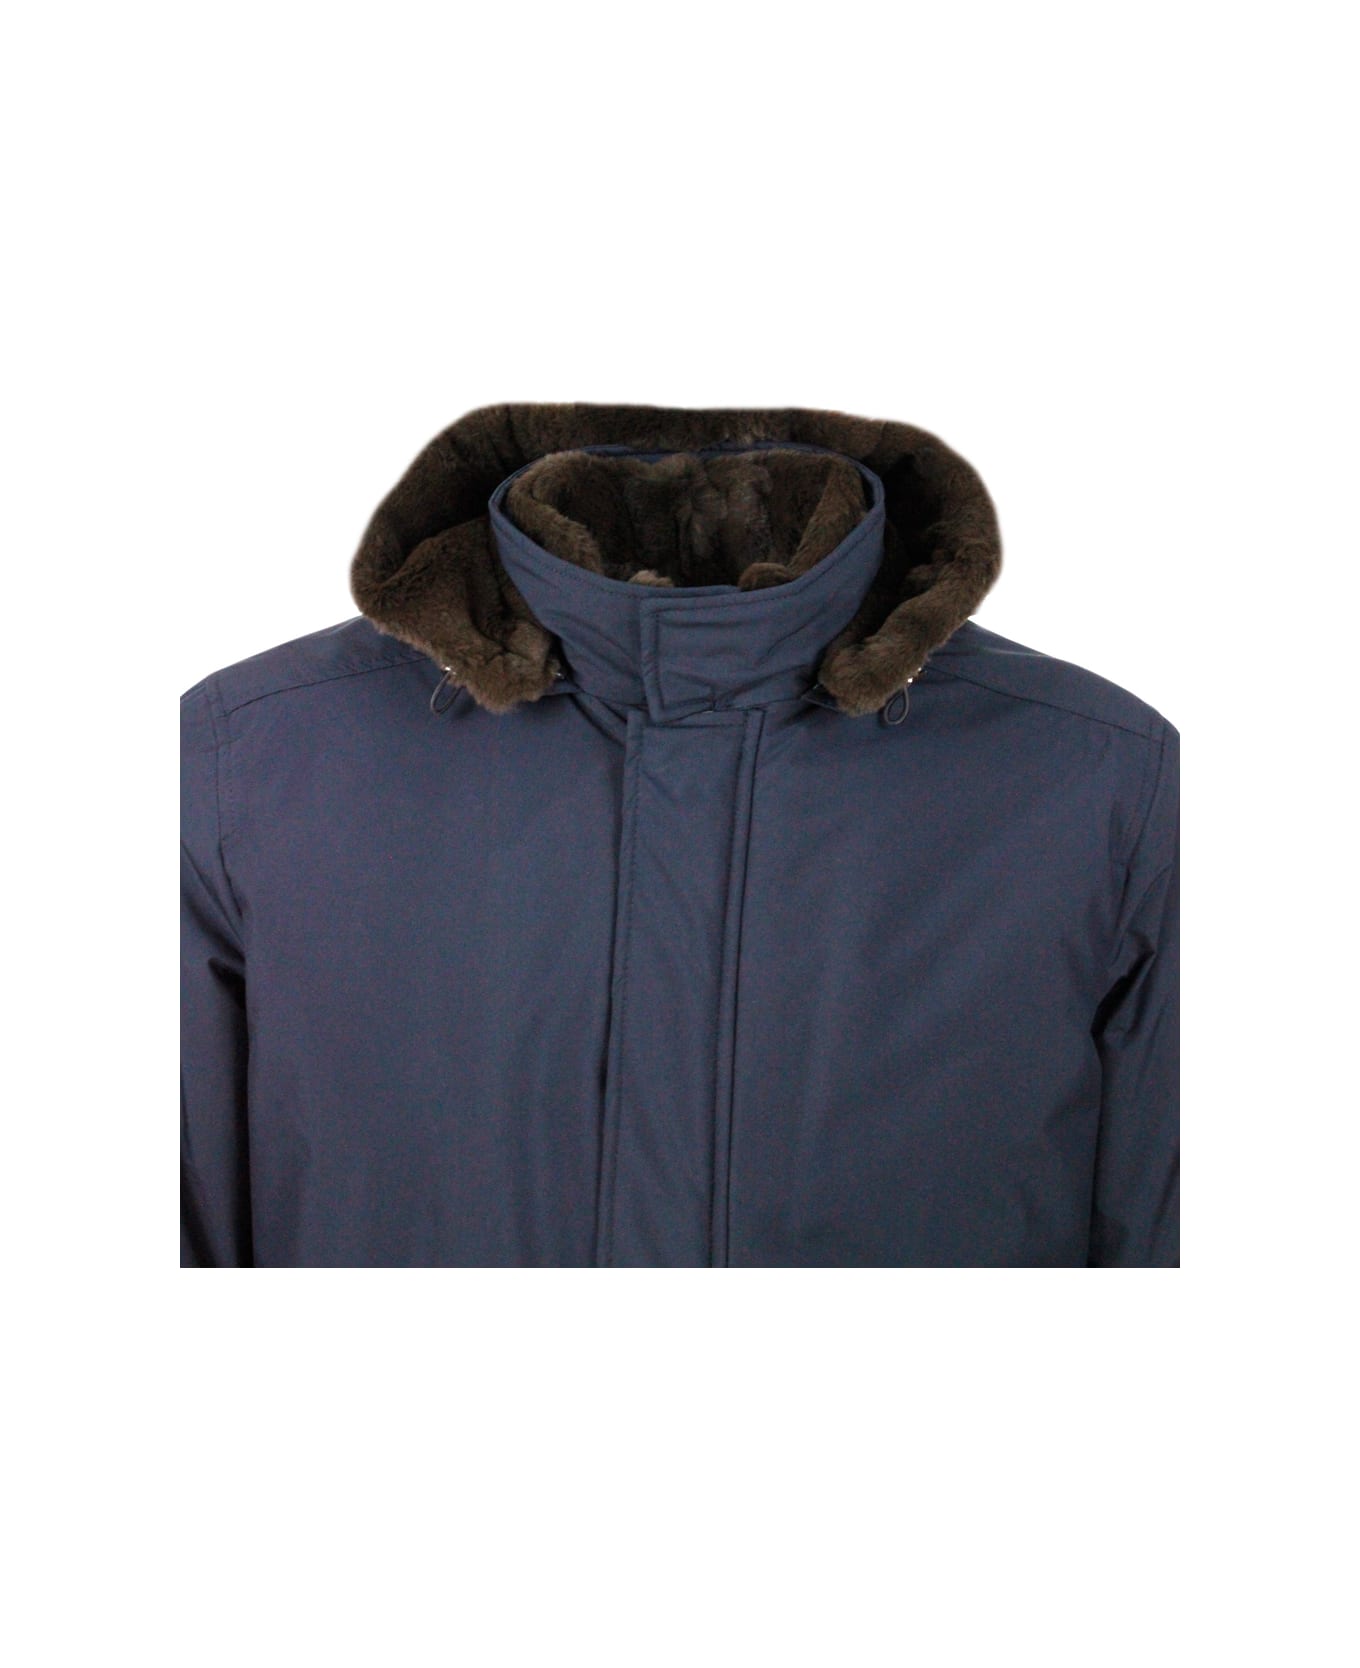 Barba Napoli 3/4 Length Luxury Jacket Padded In Technical Fabric With Precious And Precious Lapin Lining And Detachable Hood. Zip Closure And Front Pockets - Blu